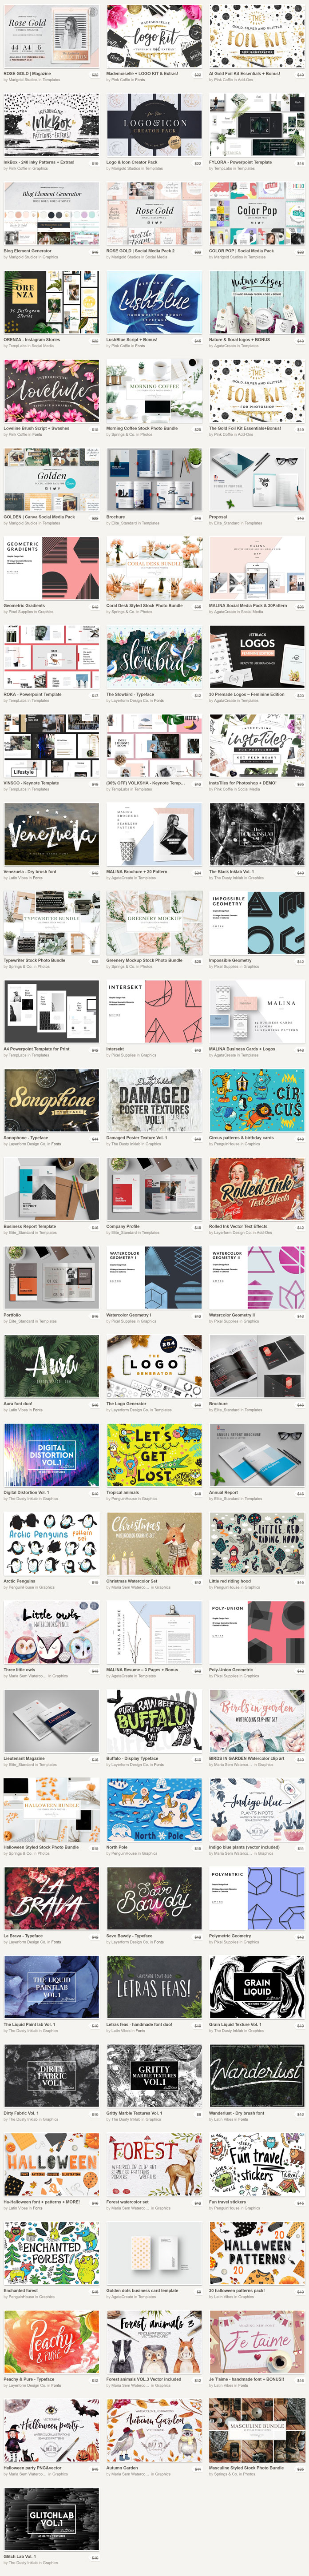 Big bundle of 88 incredible design products from Creative Market.